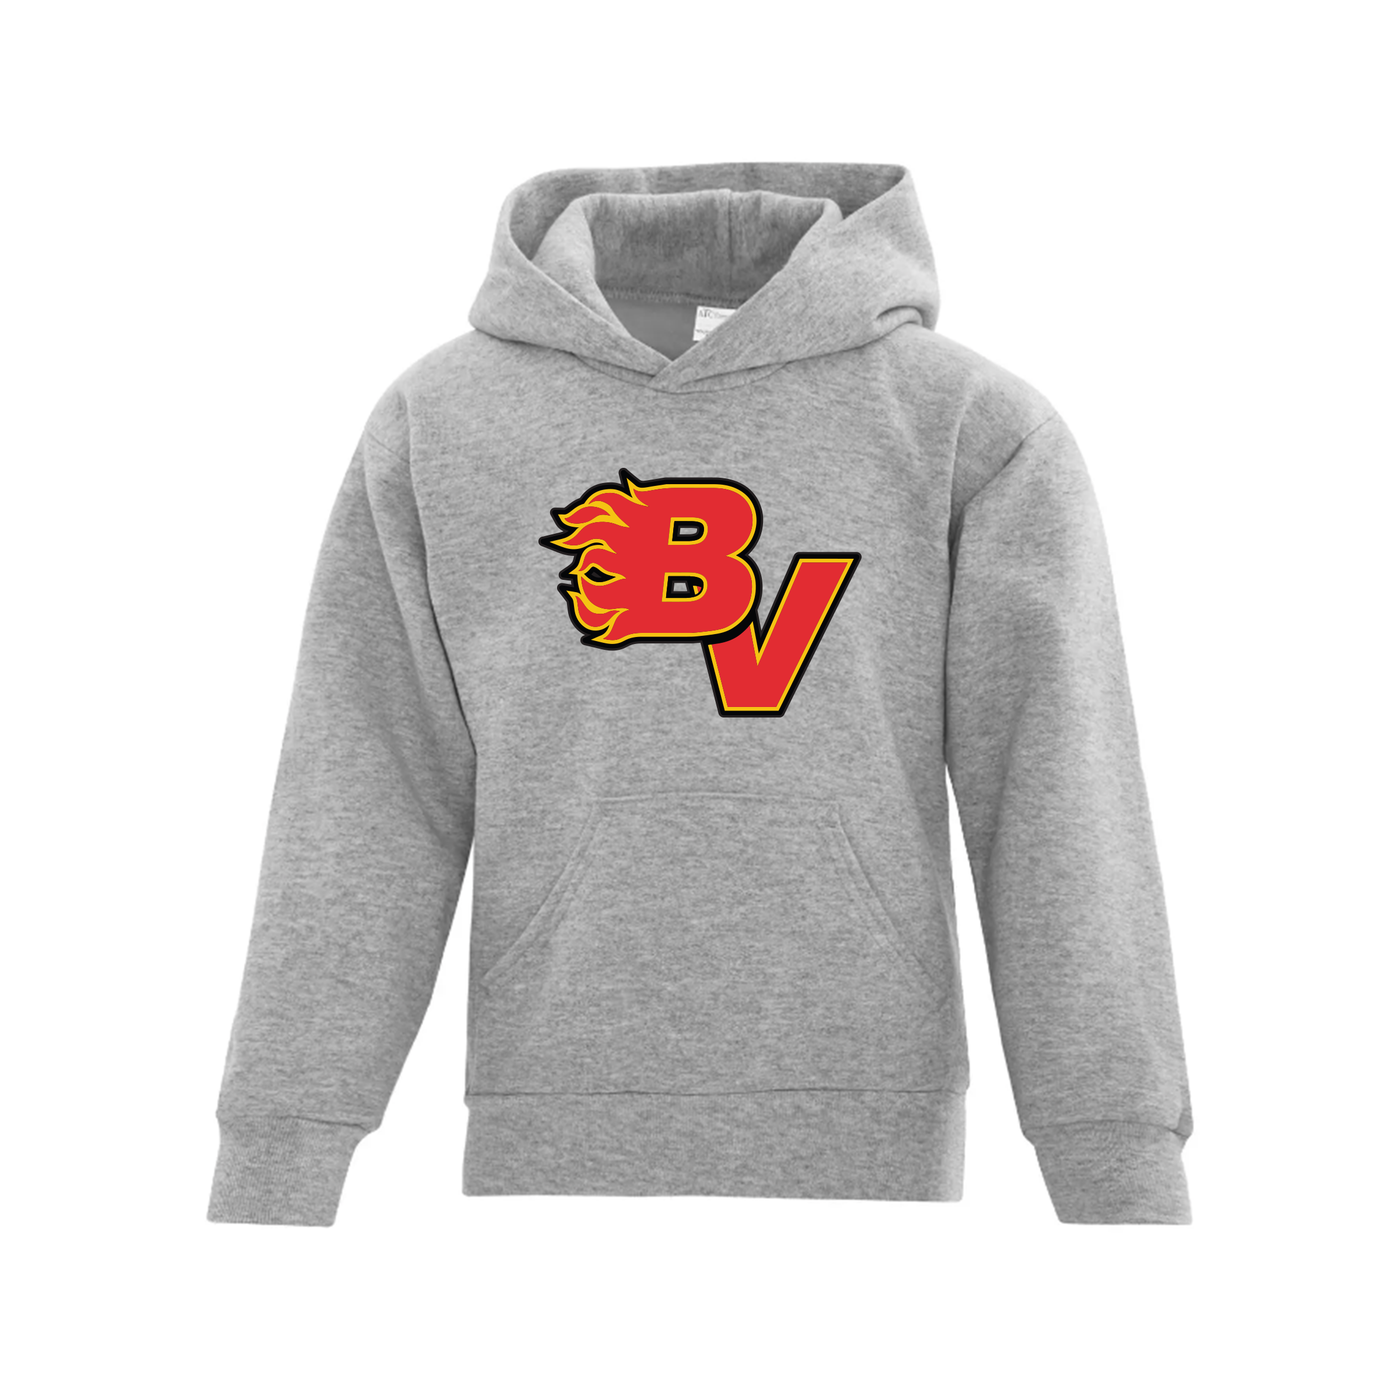 Everyday Fleece Youth Hoodie - Bow Valley